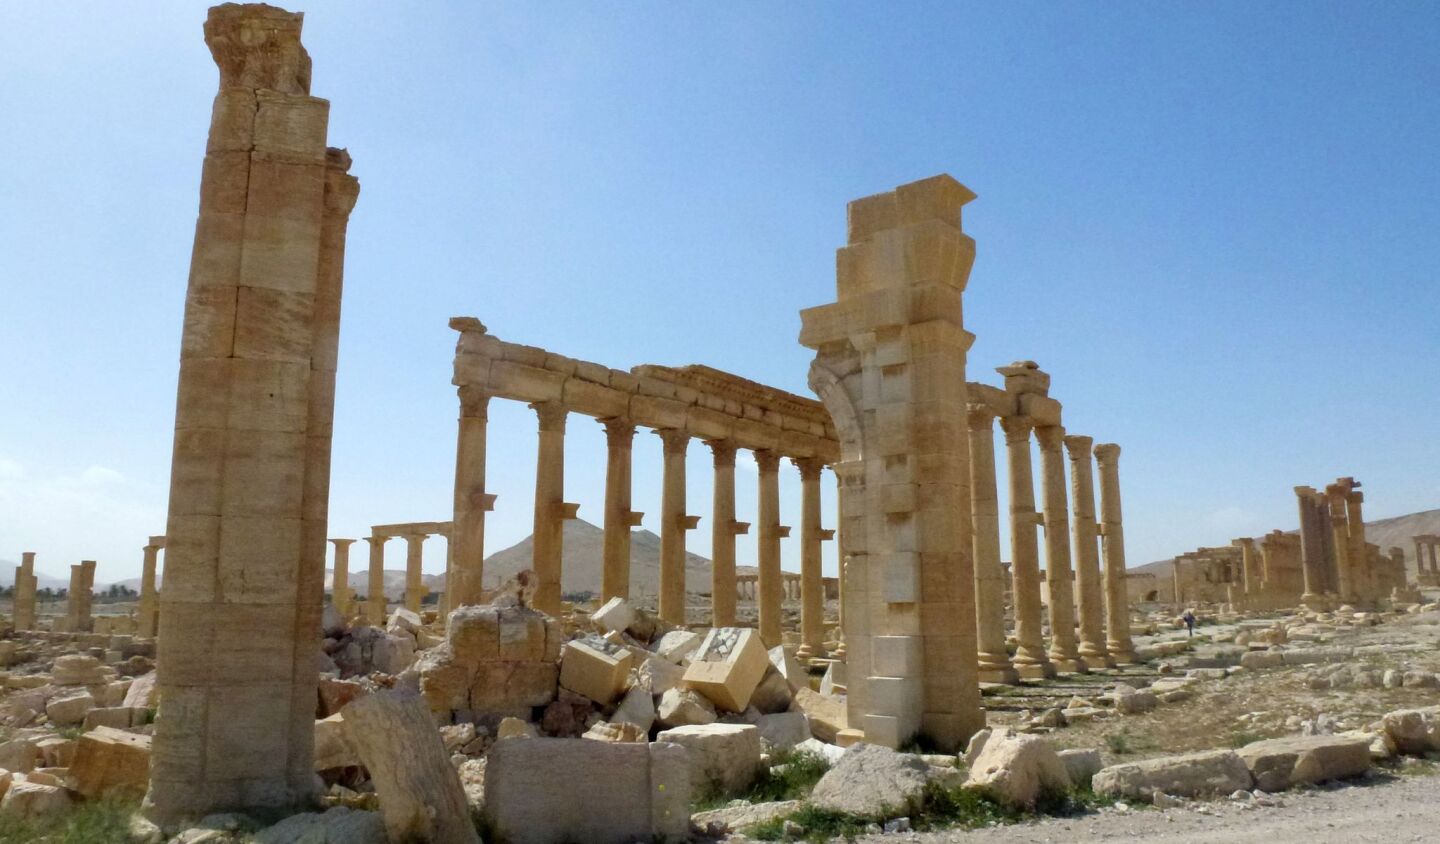 Part of the remains of the Arch of Triumph monument that was destroyed by Islamic State in the ancient Syrian city of Palmyra, after government troops recaptured the UNESCO World Heritage site.